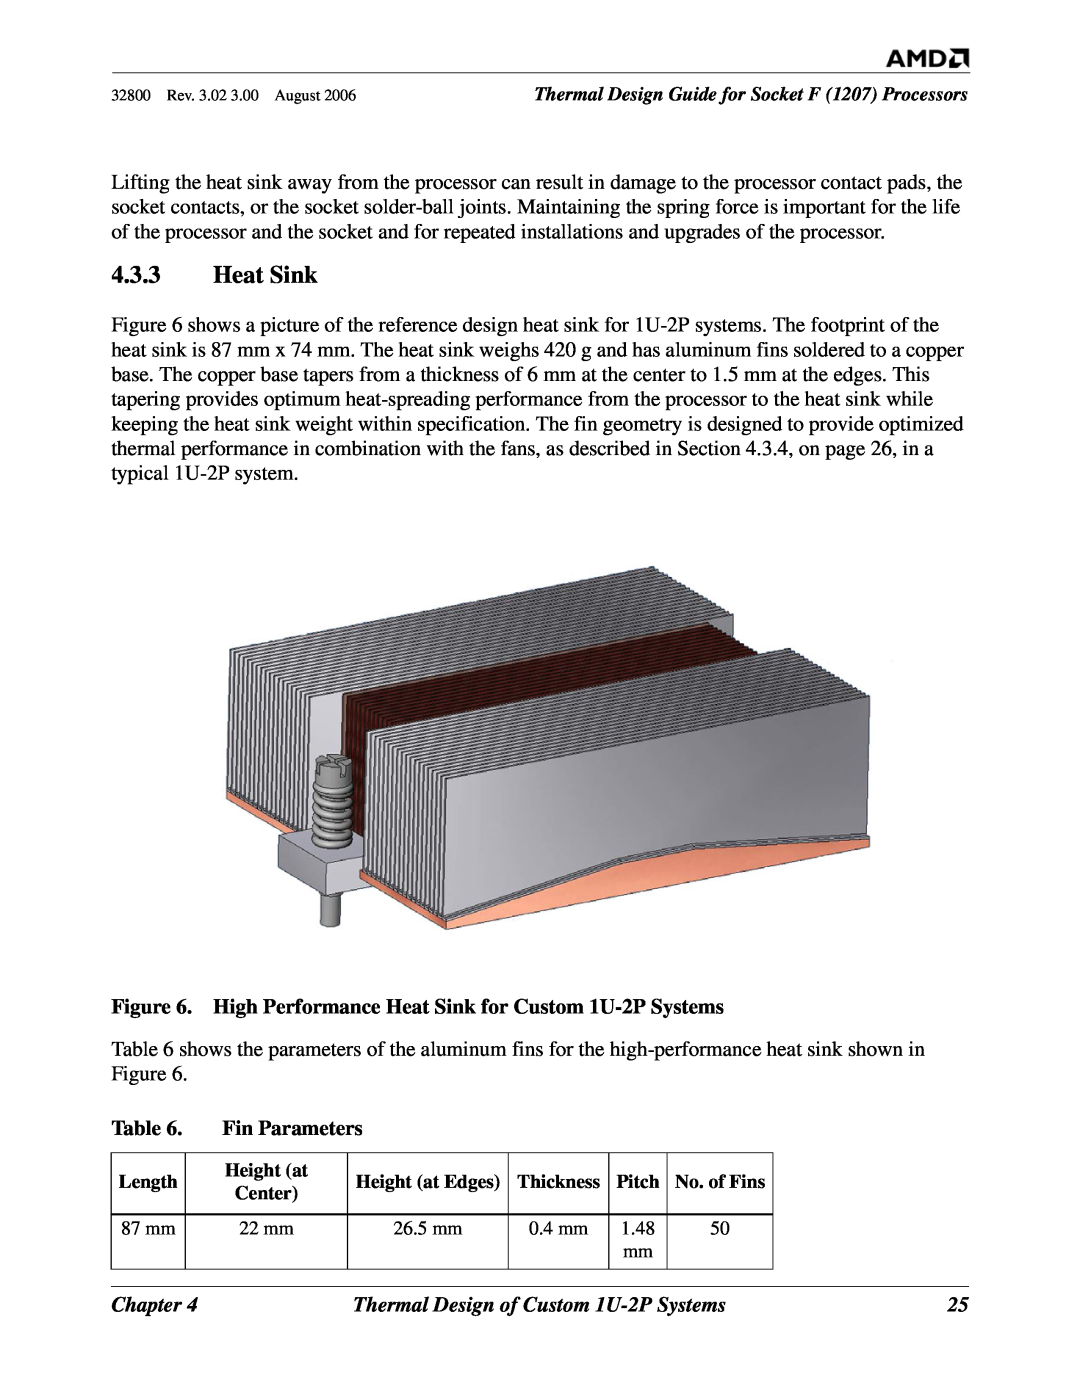 AMD 1207 manual High Performance Heat Sink for Custom 1U-2P Systems, Fin Parameters, Chapter 